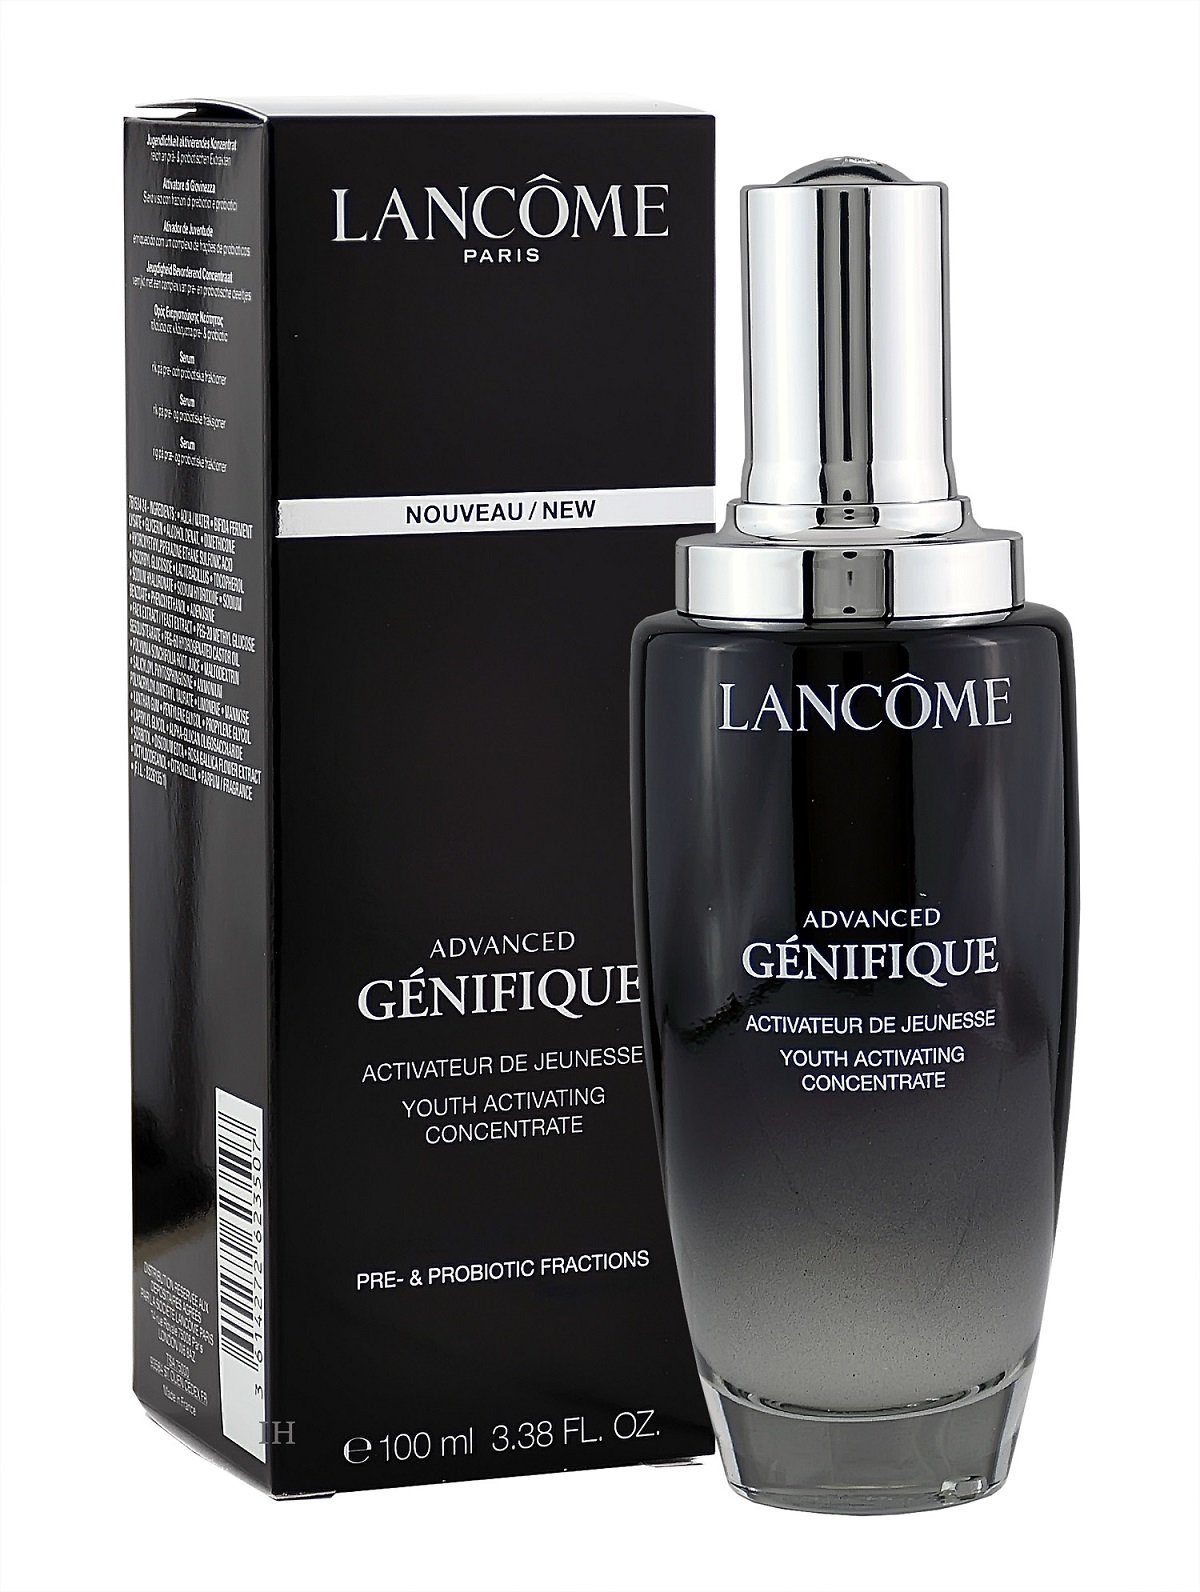 LANCOME Gesichtsserum Lancome Advanced Activating Youth Genifique Concentrate 100ml